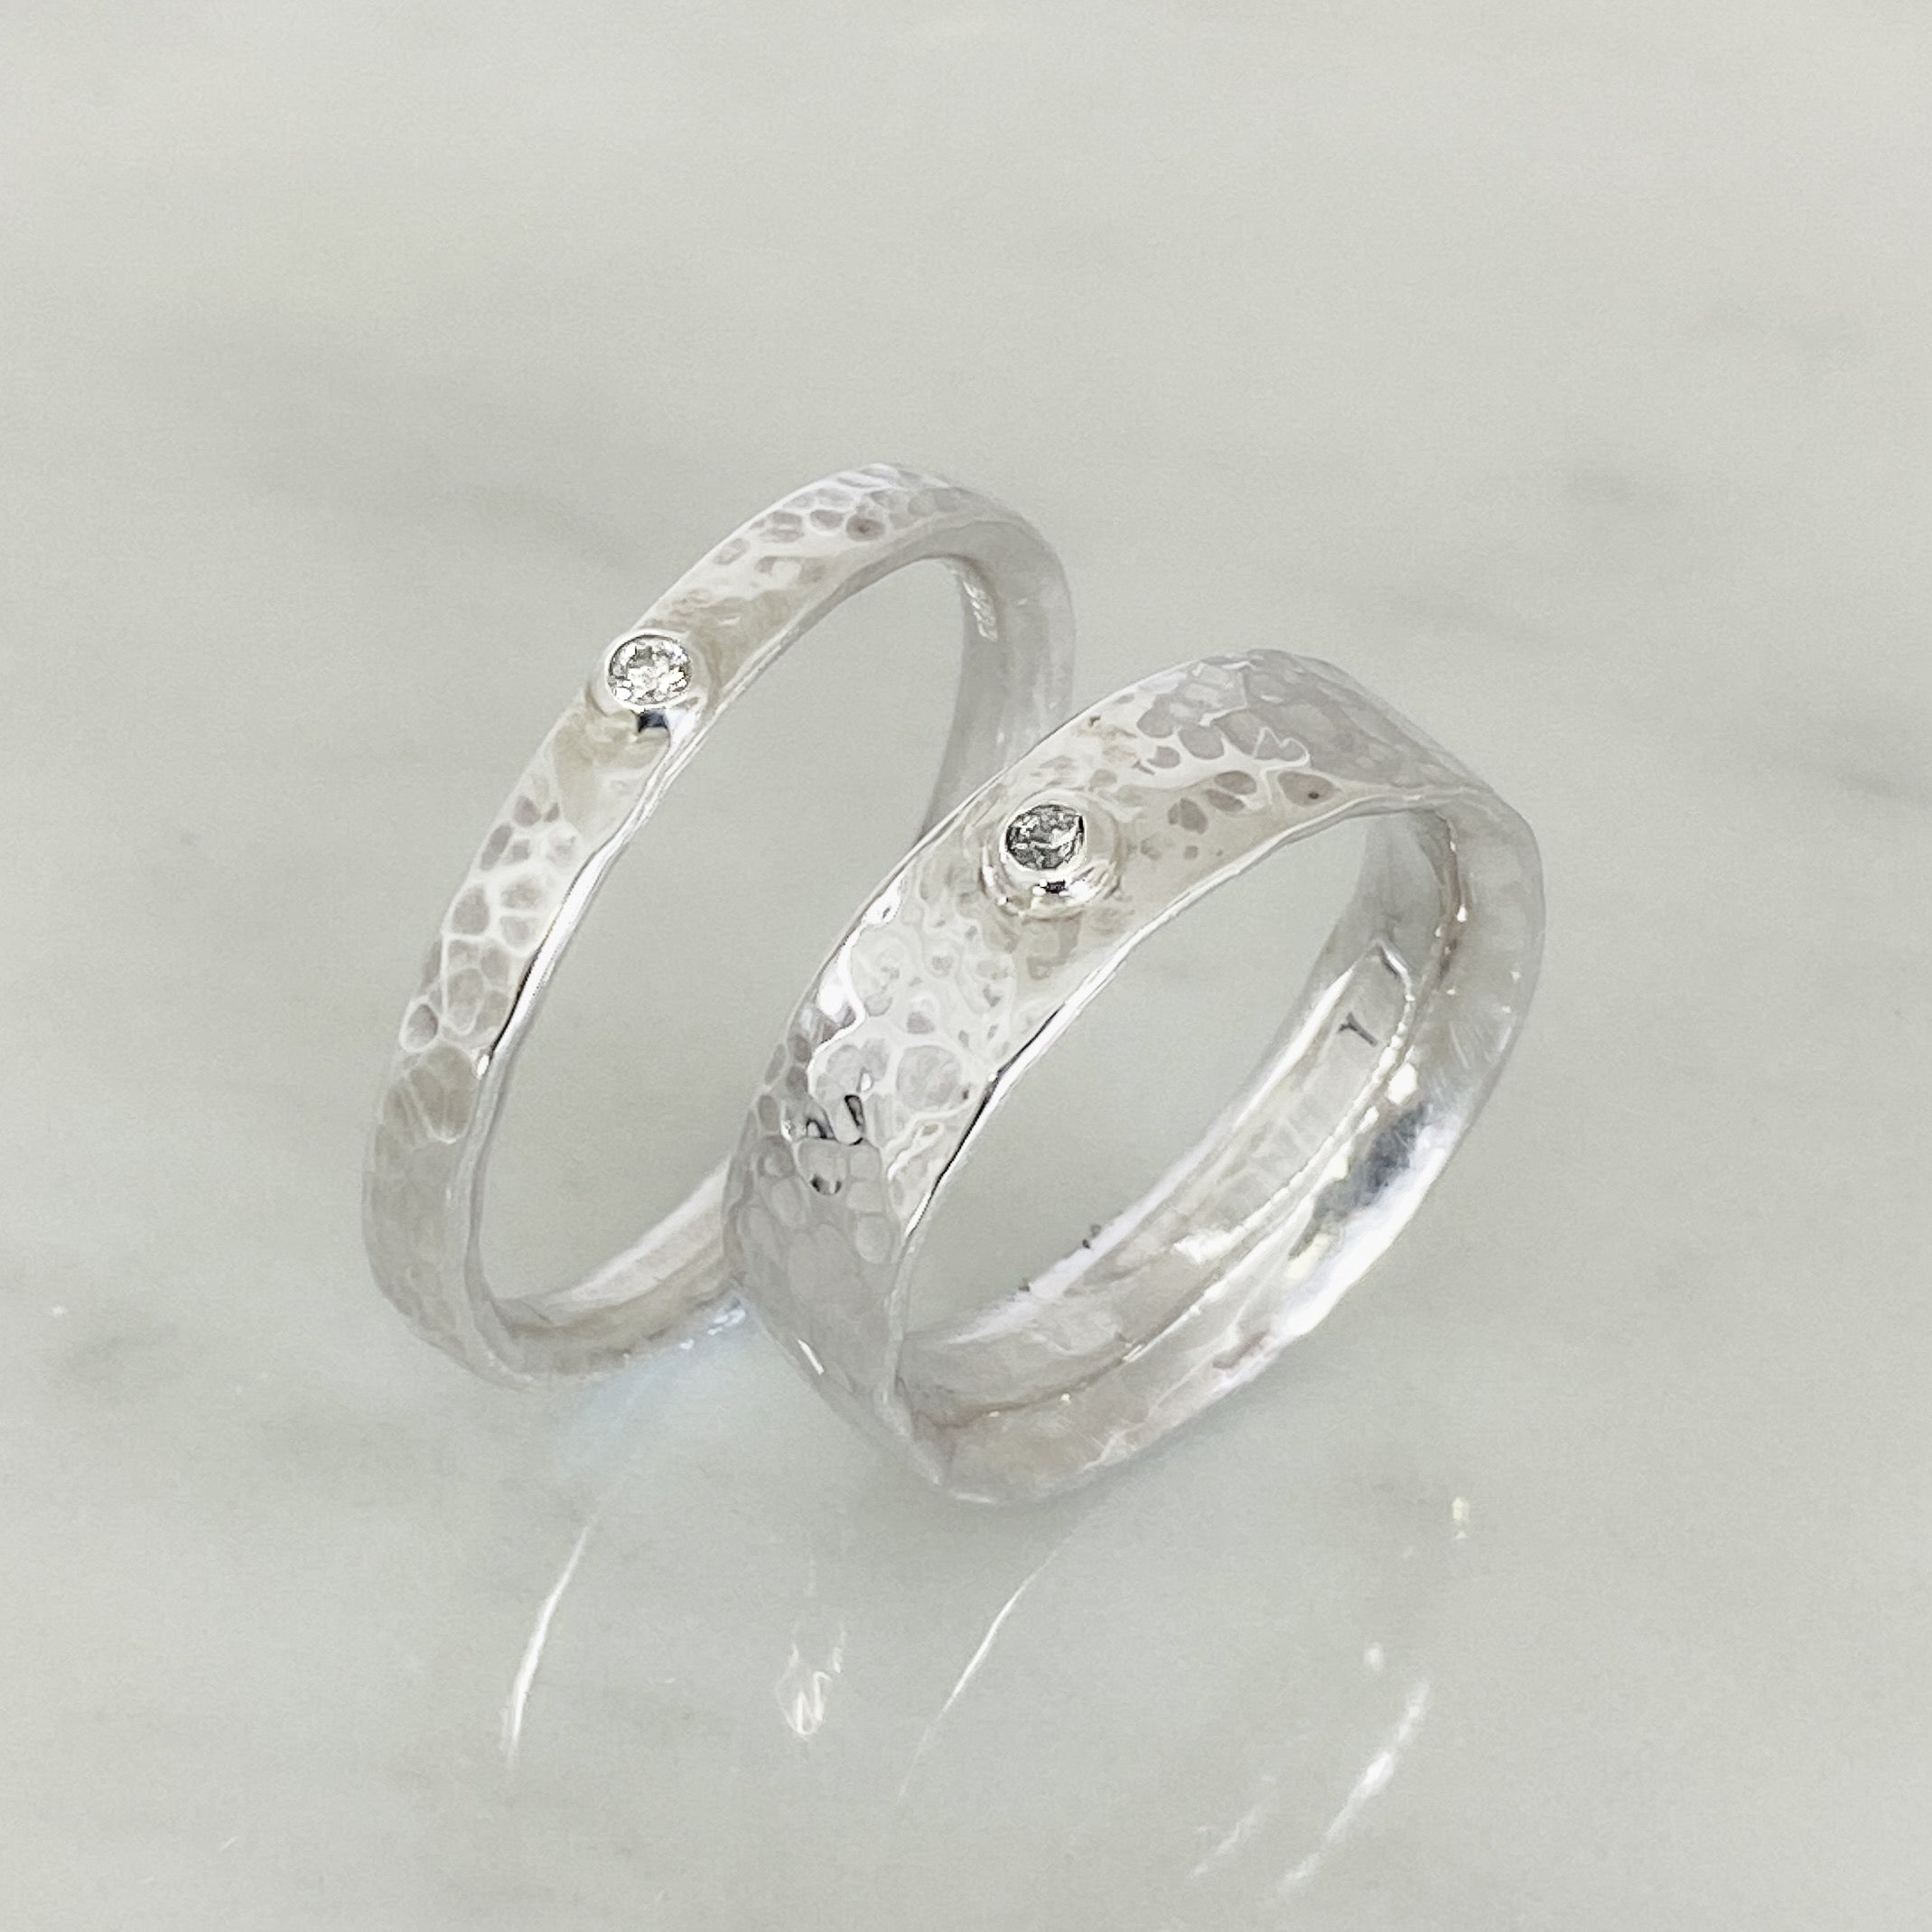 Silver Diamond Dimpled Wedding Ring